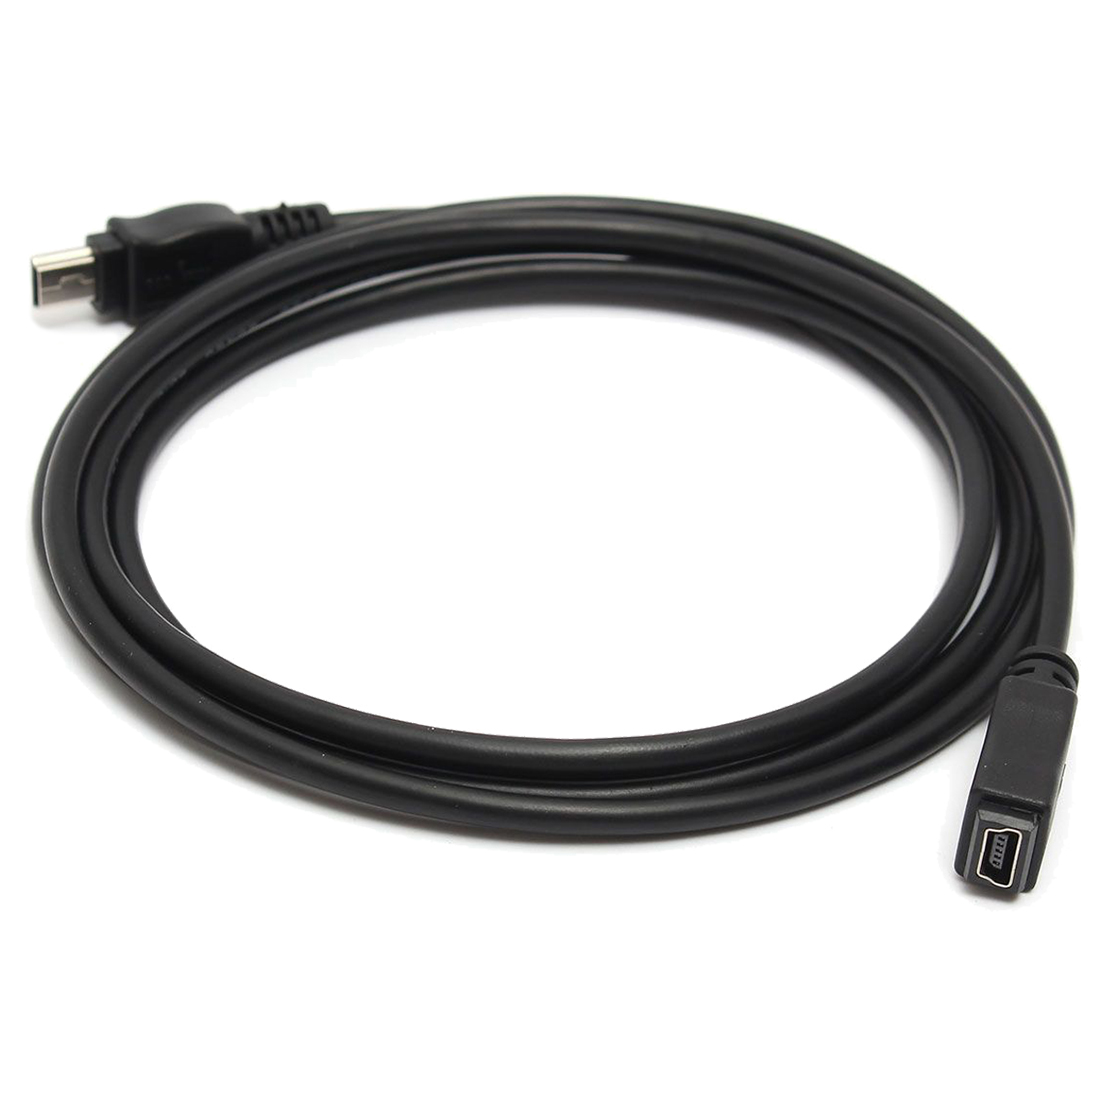 1.5M Mini Usb B 5pin Man-vrouw Extension Cable Cord Adapter Black